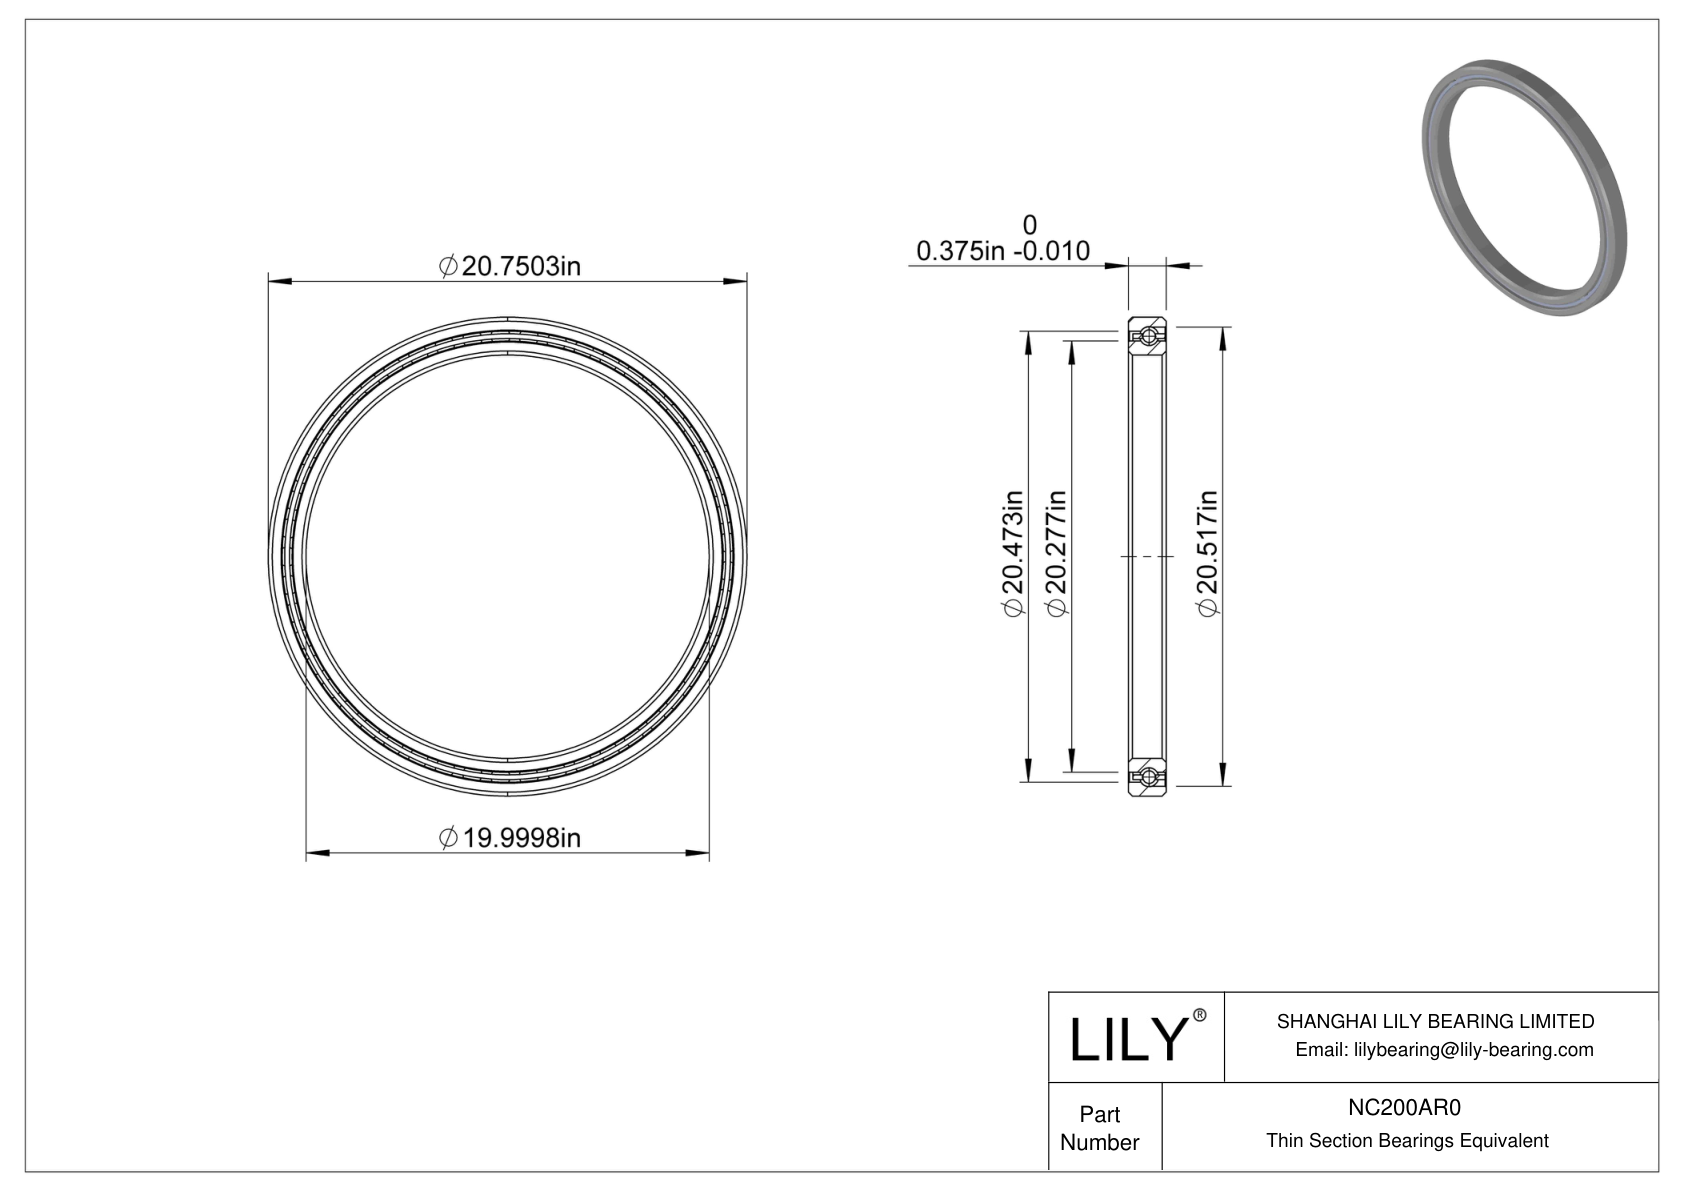 NC200AR0 Constant Section (CS) Bearings cad drawing